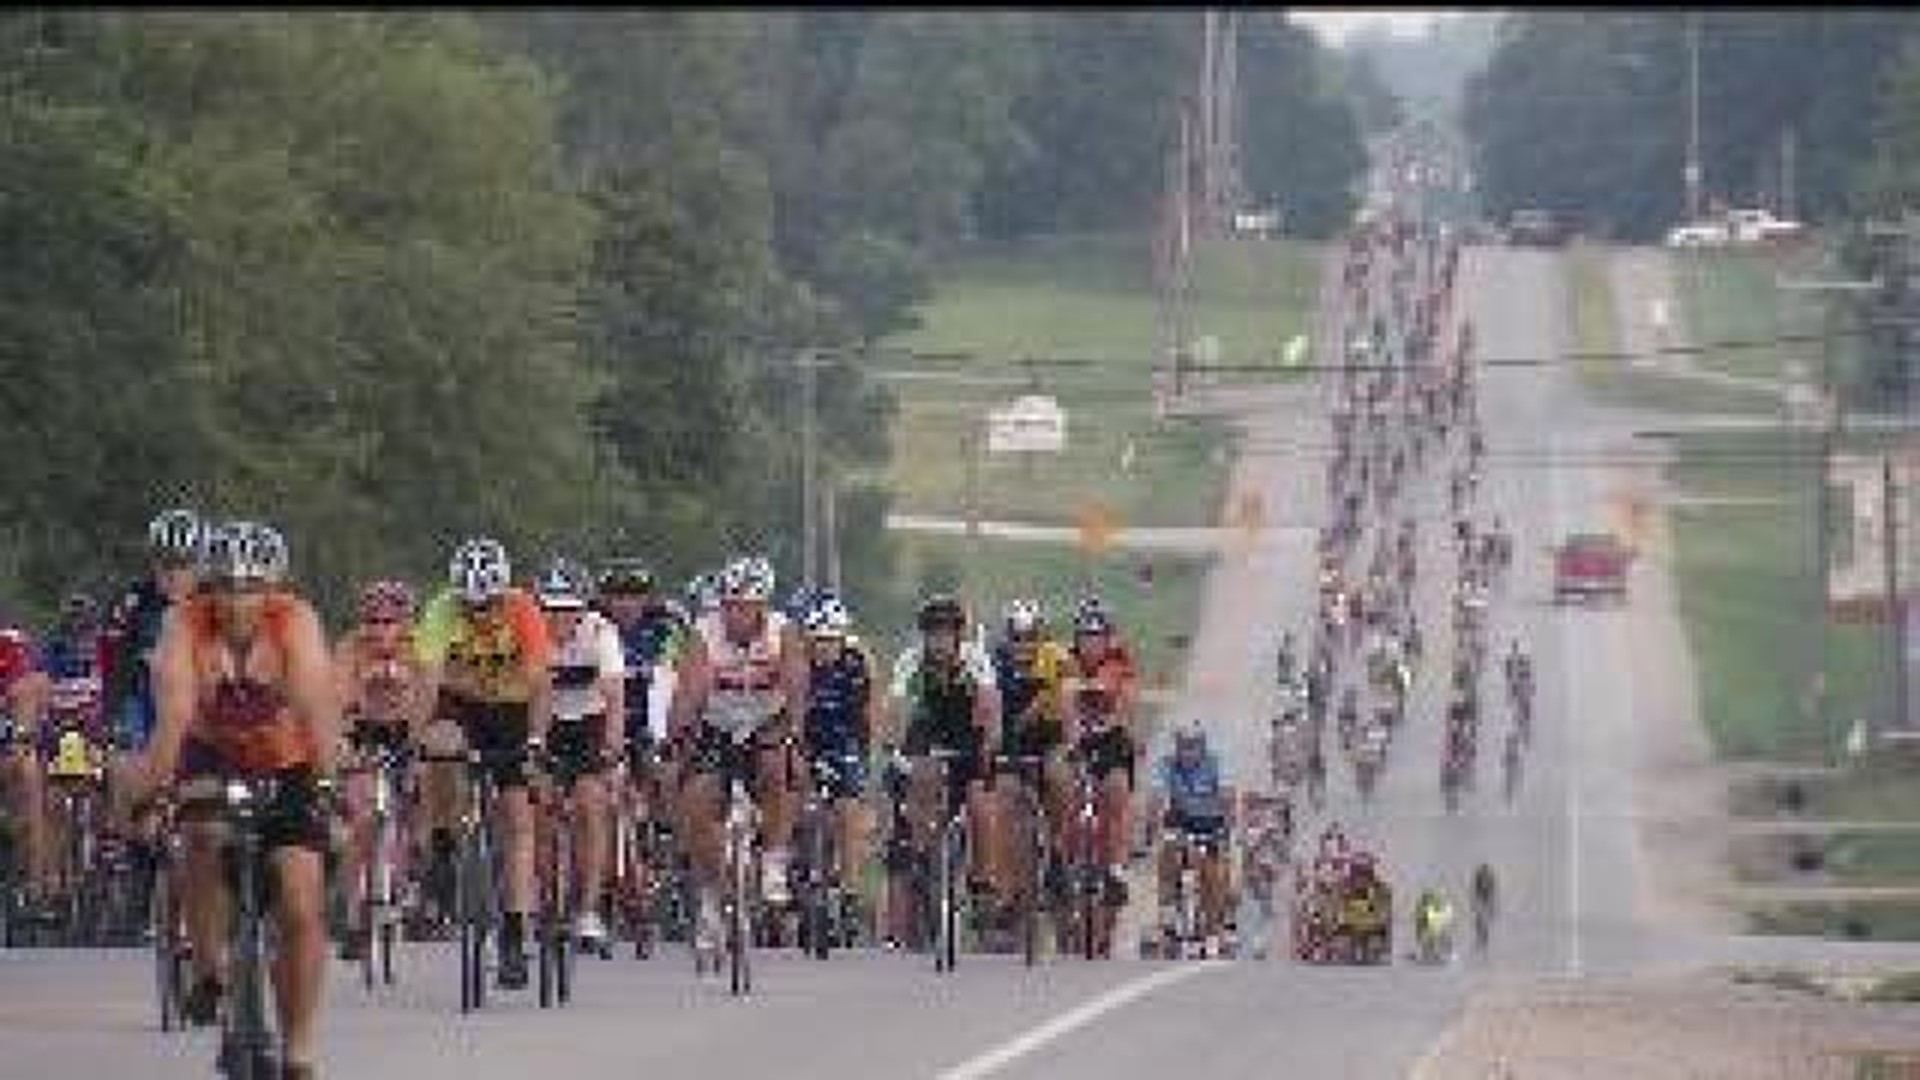 RAGBRAI finishes up at Mississippi River